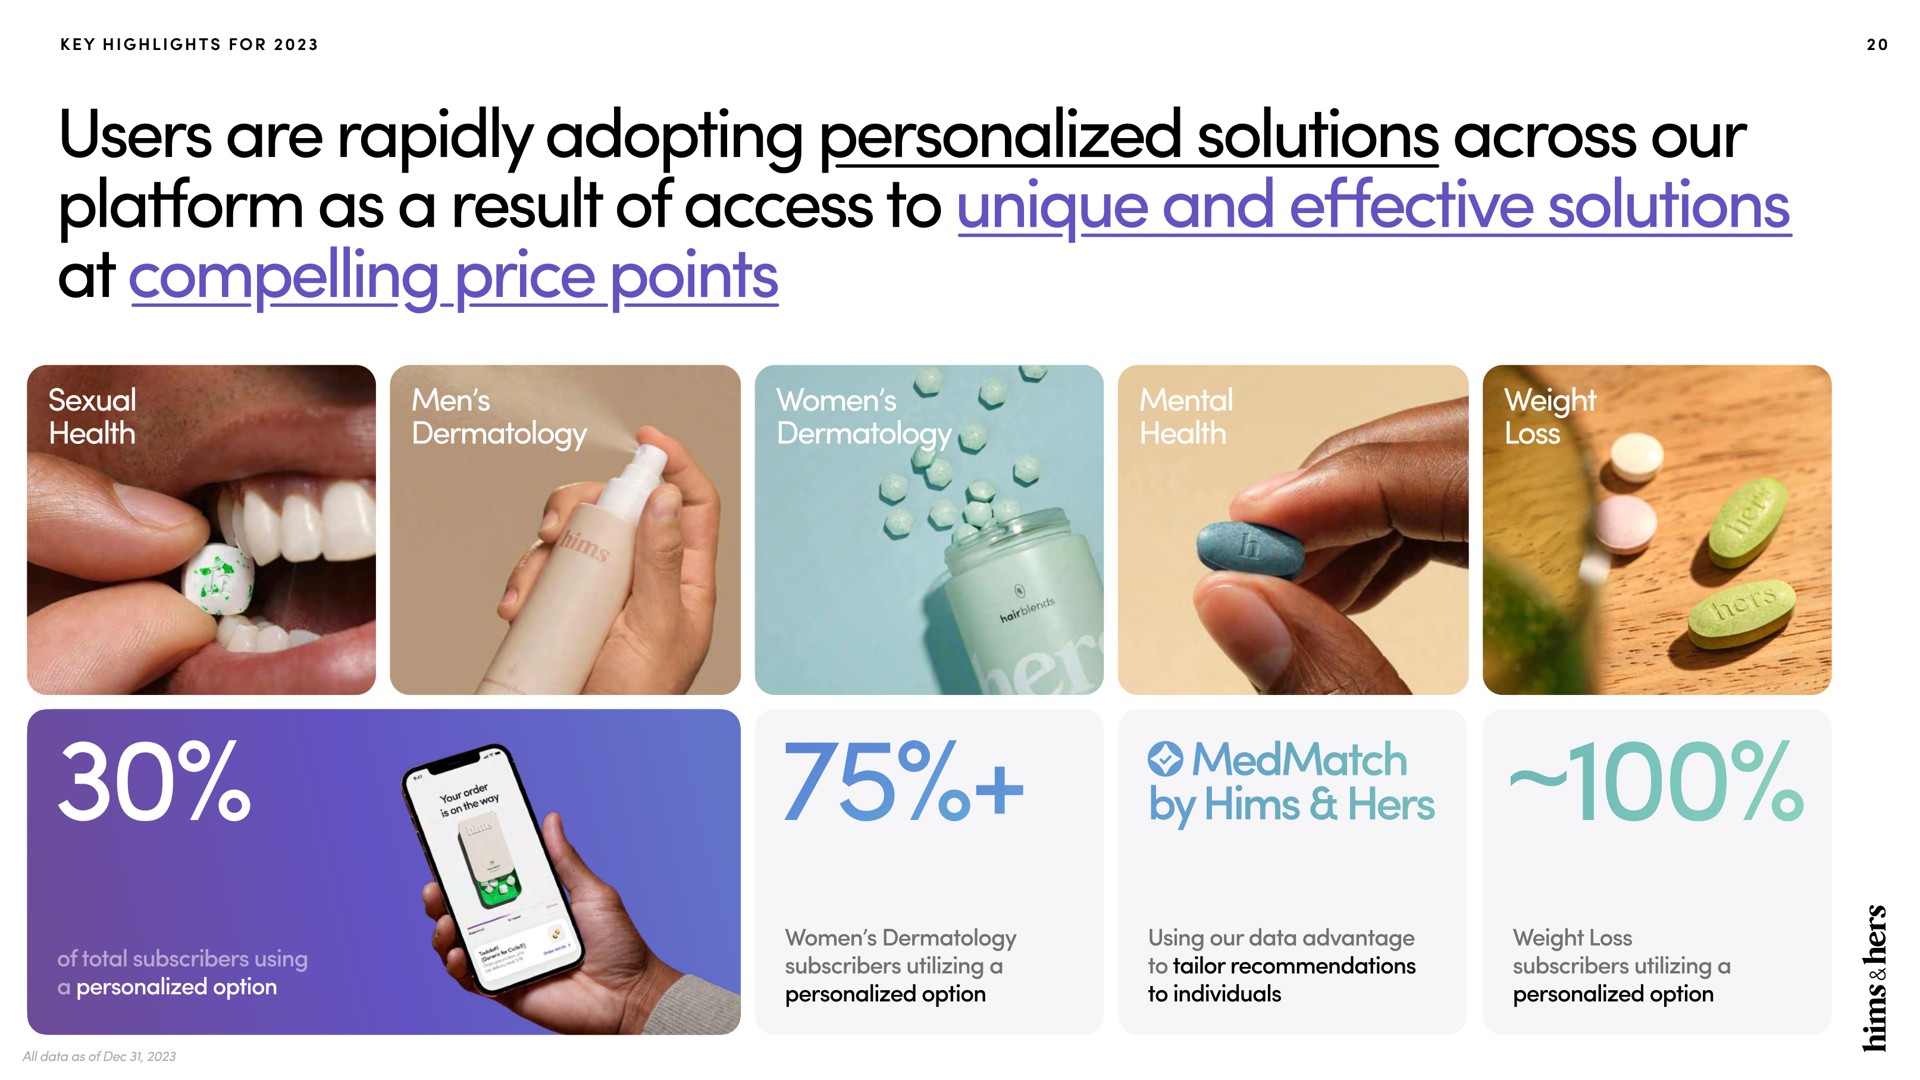 users are rapidly adopting personalized solutions across our unique and effective solutions platform as a result of access to at compelling price points hers | Hims & Hers